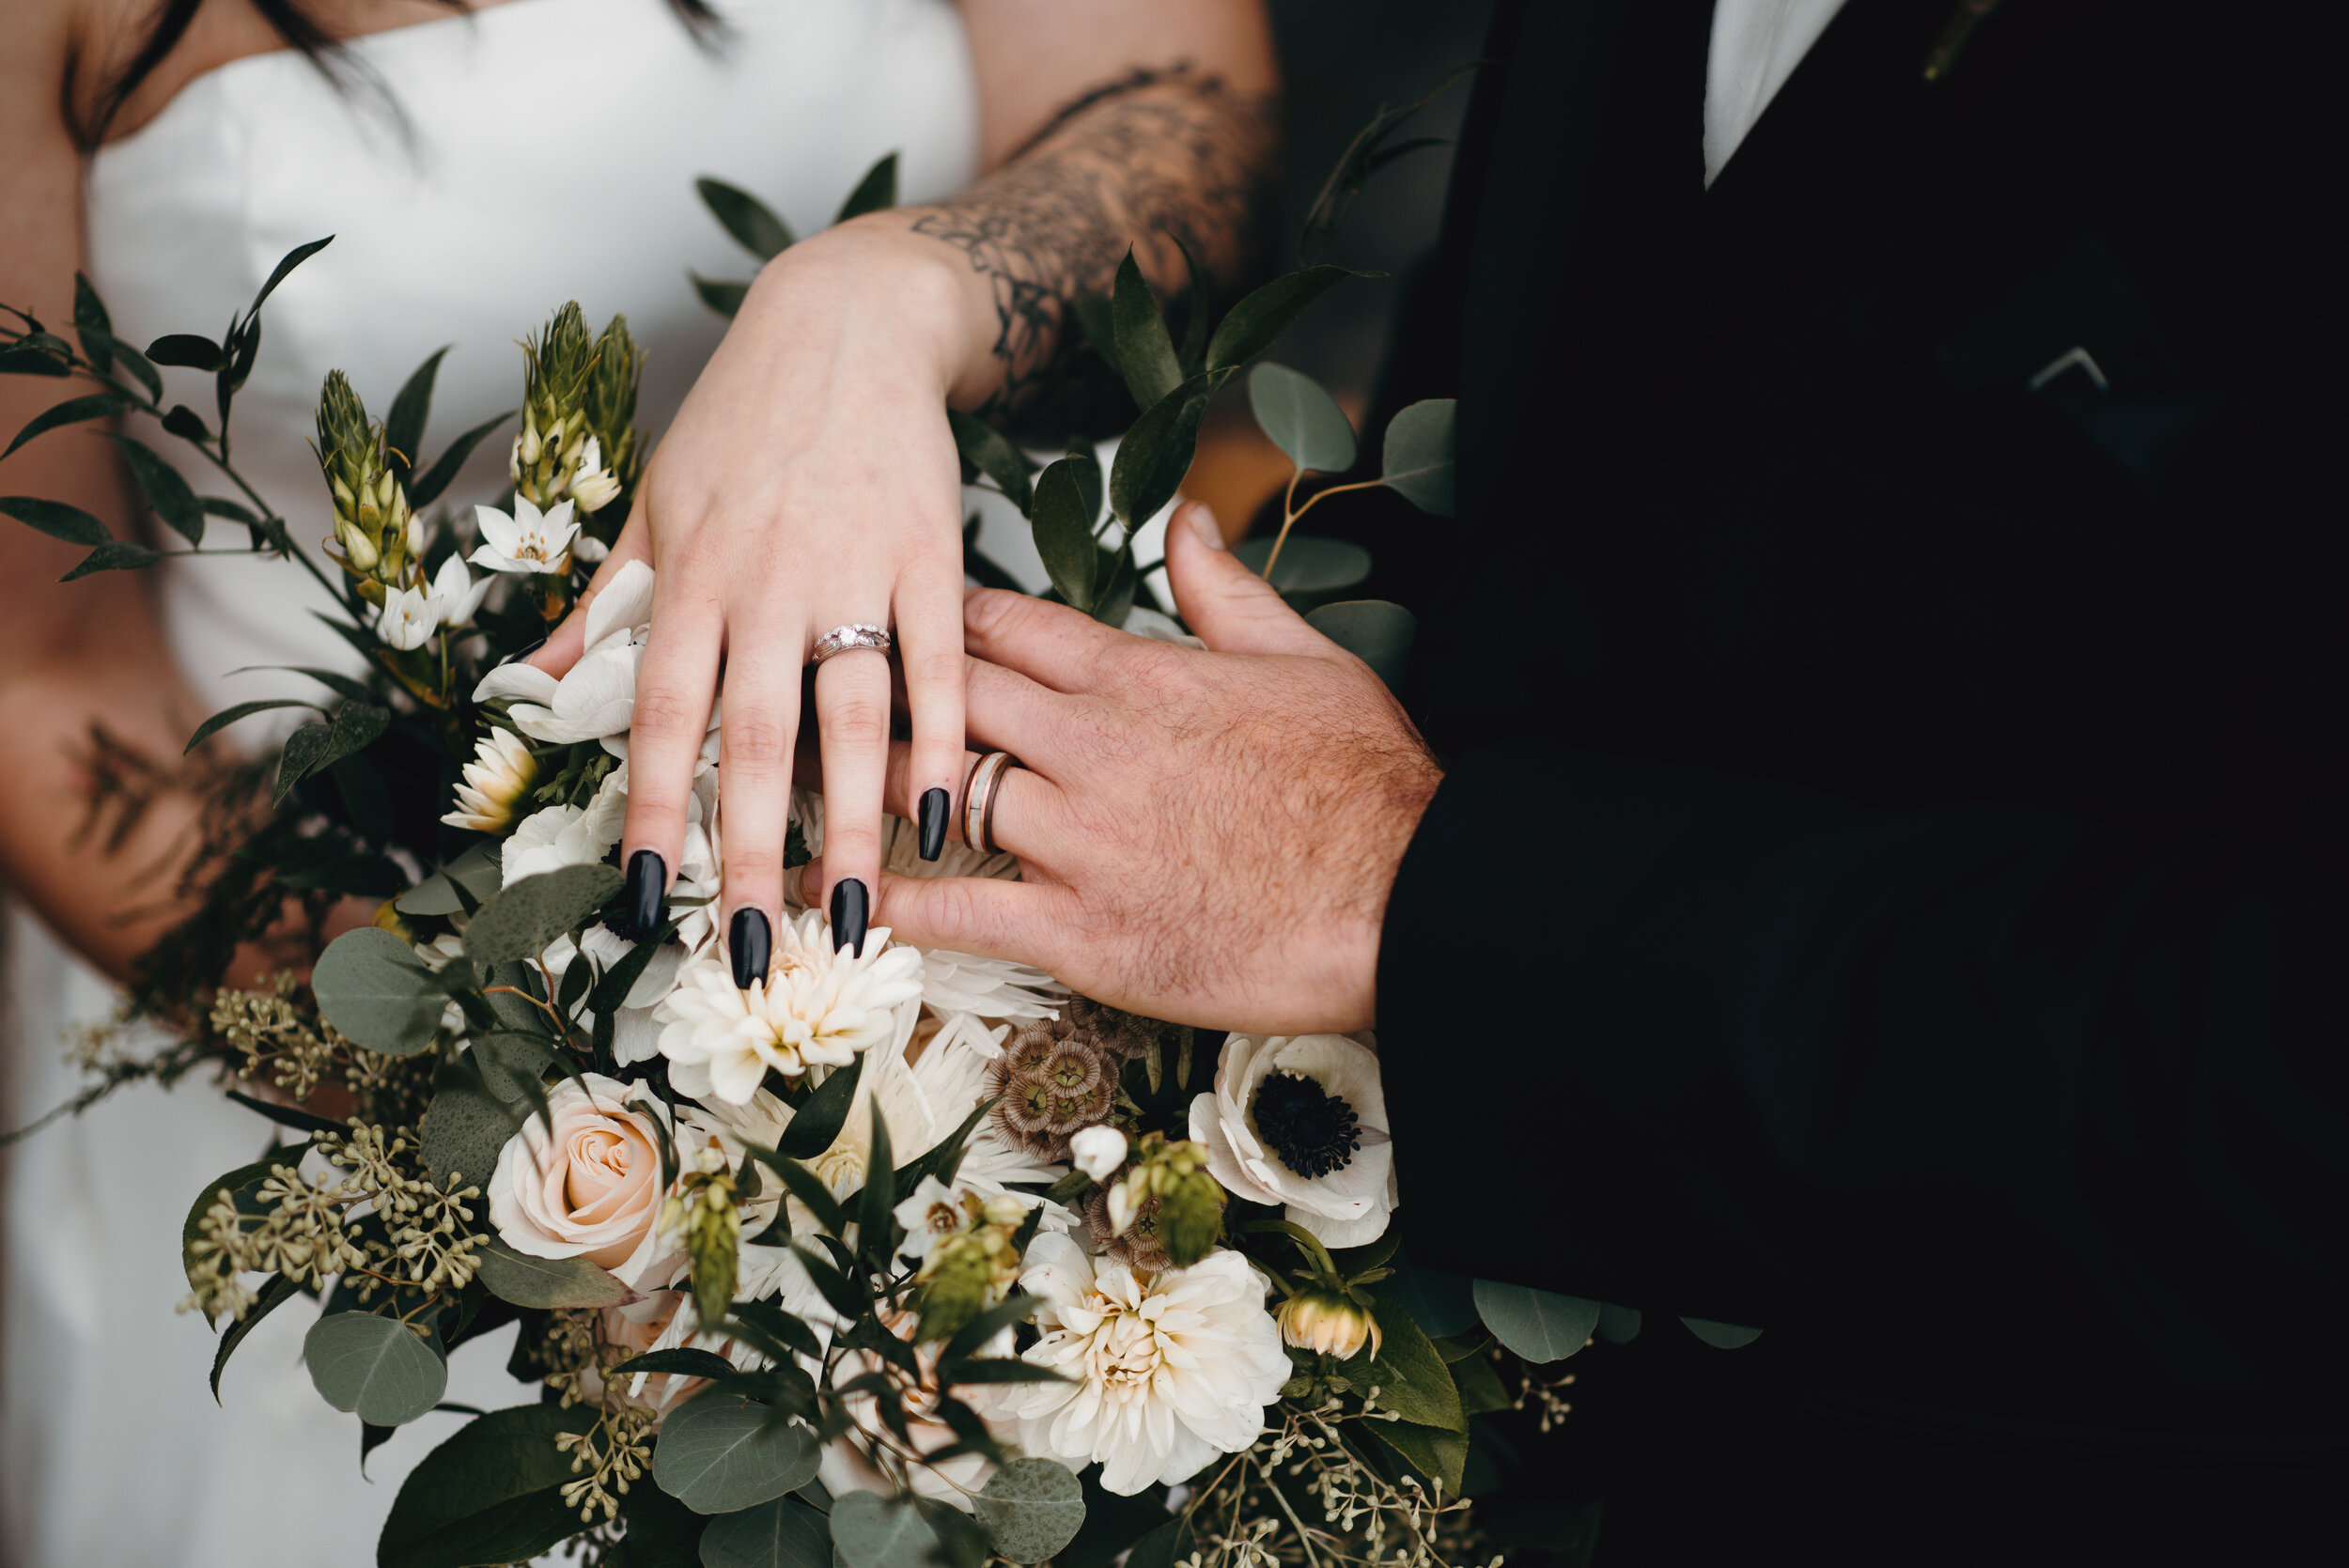 Flowers by Unity Flower Shop. Raegan’s engagement ring: Made from Zach’s grandmother’s.Raegan’s Wedding Band: @diamondfindjewelry on EtsyZach’s Wedding Band: Made by family friend, Chris Kein